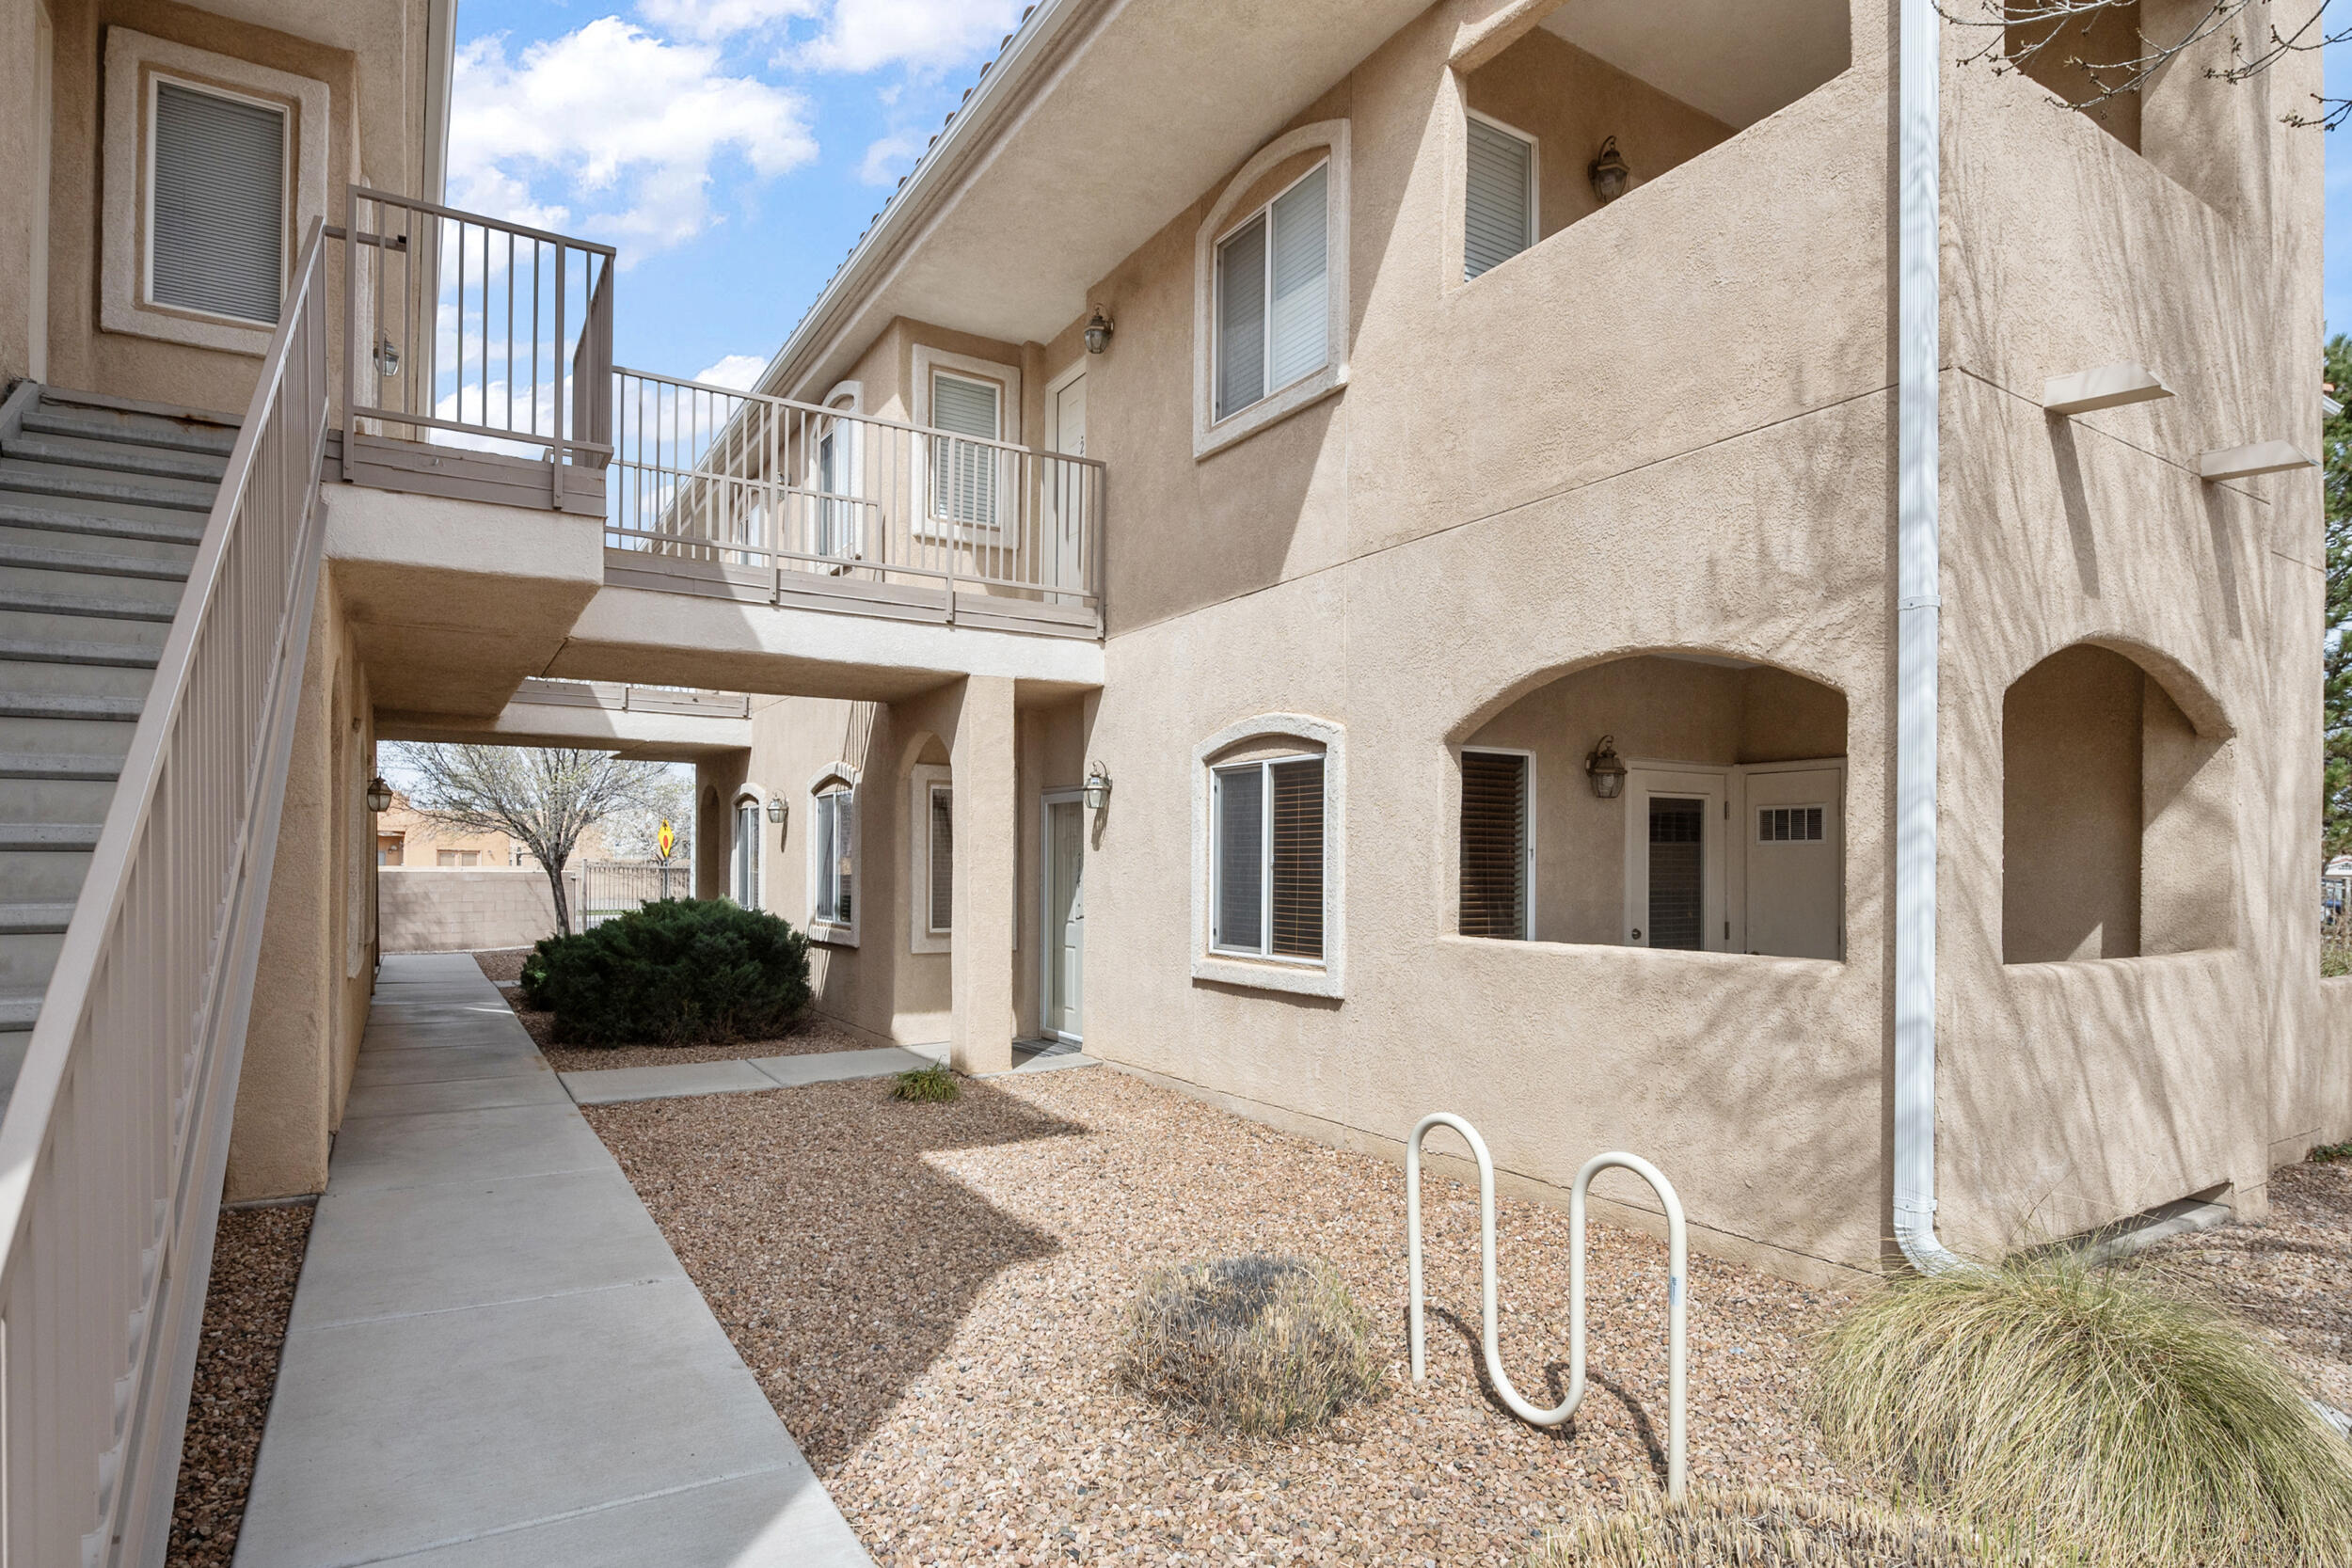 Ground level unit in the highly sought after Vista Del Norte gated community. Great location right next to the clubhouse/pool and across the street from the park. This condo has been well taken care of. Updated laminate flooring throughout the living areas and newer appliances in the kitchen. New dishwasher (2 years) and newer water heater (2020).  Private garage space and designated parking spot right in front of the unit. HOA covers the clubhouse, gym, community pools, security, exterior of residence, front landscape and more! Schedule your showing today!